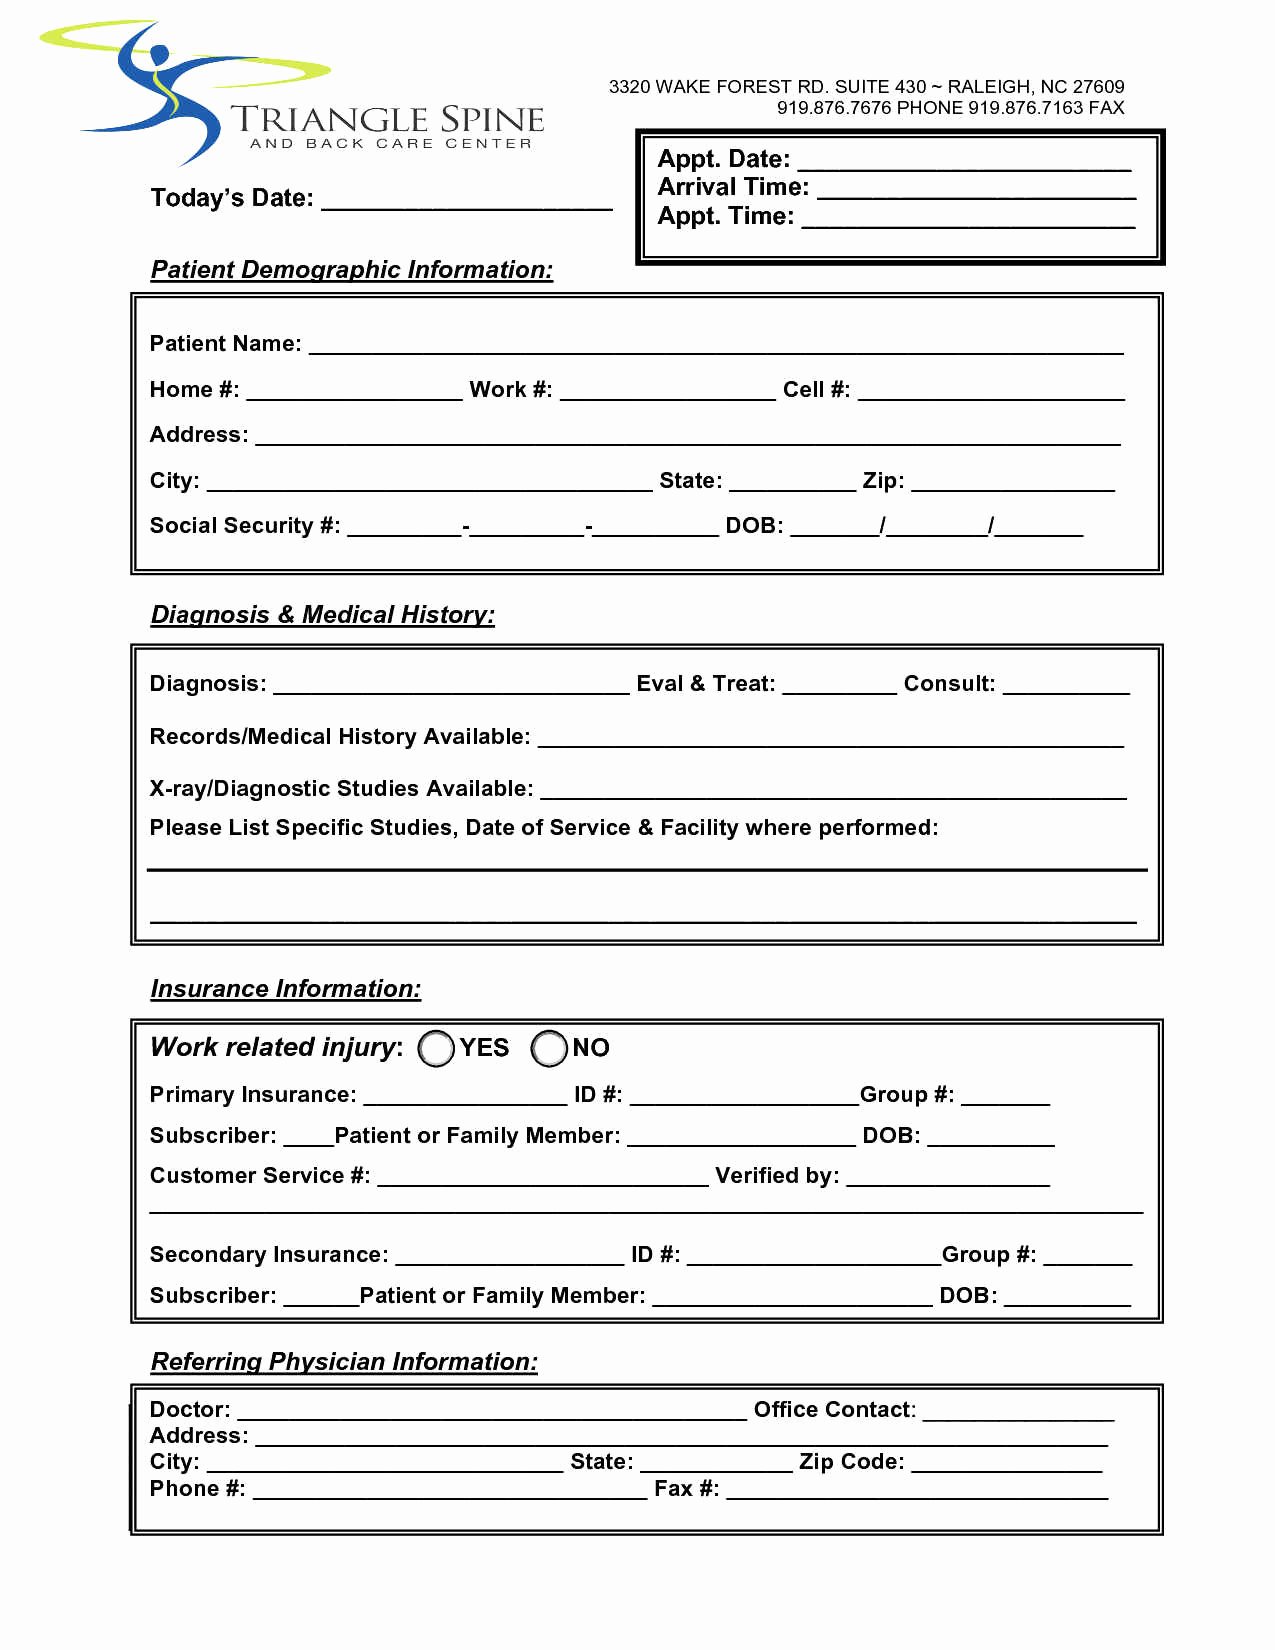 Medical Referral form Templates Best Of Medical Referral form Templates – Medical form Templates